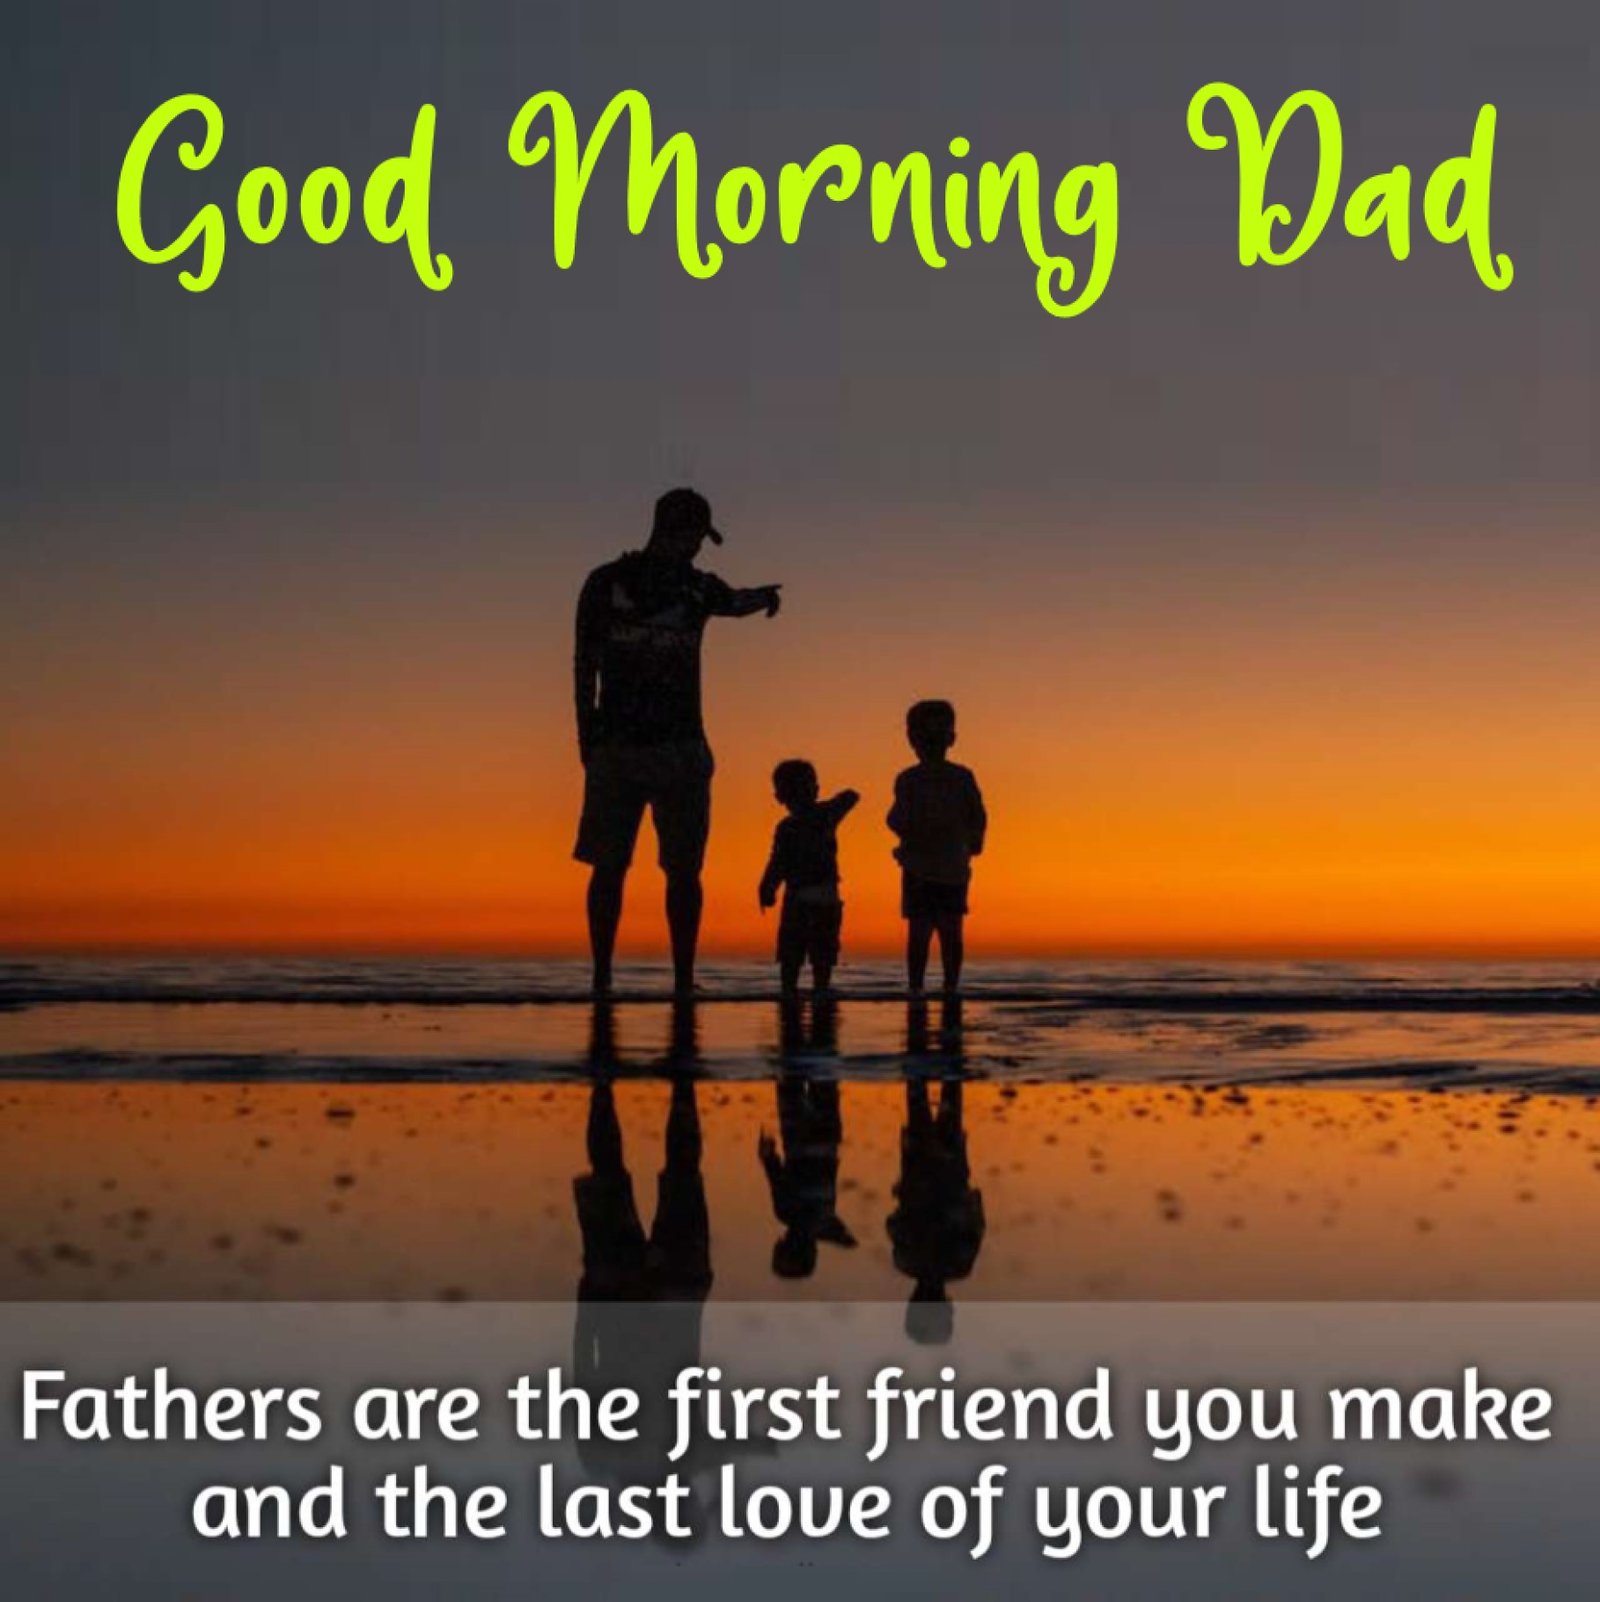 New Style Good Morning Dad Quotes 2023 Images Whatsapp Twitter Motivational